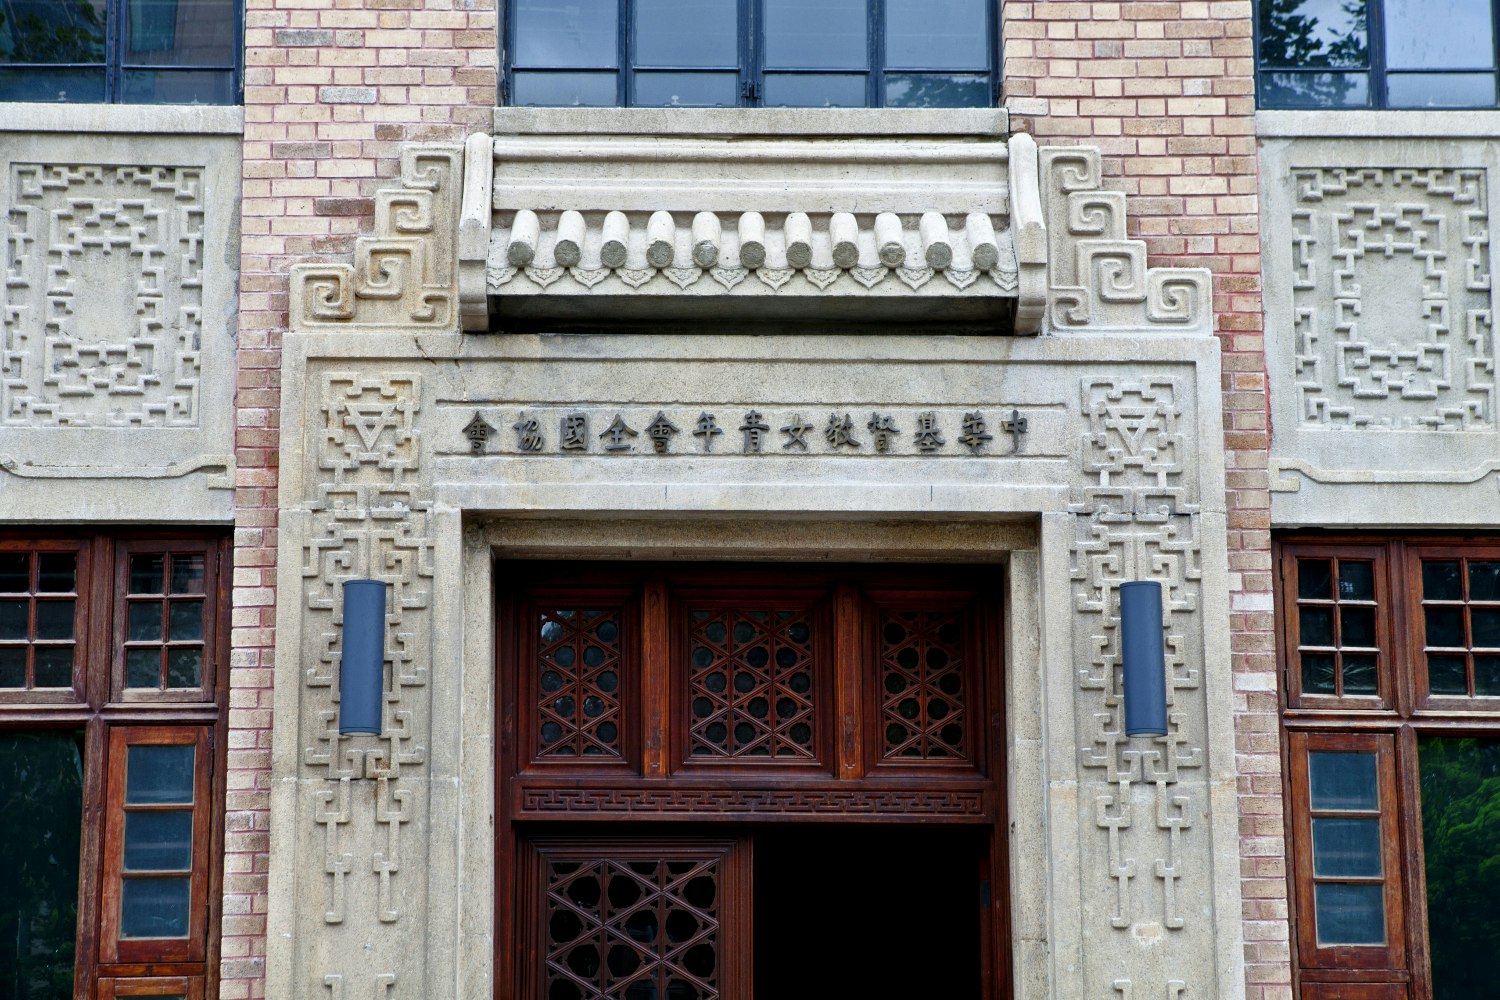 Chinese deco, or art deco with Chinese influences, can be seen all over Shanghai © Molly Mazilu / CC BY 2.0